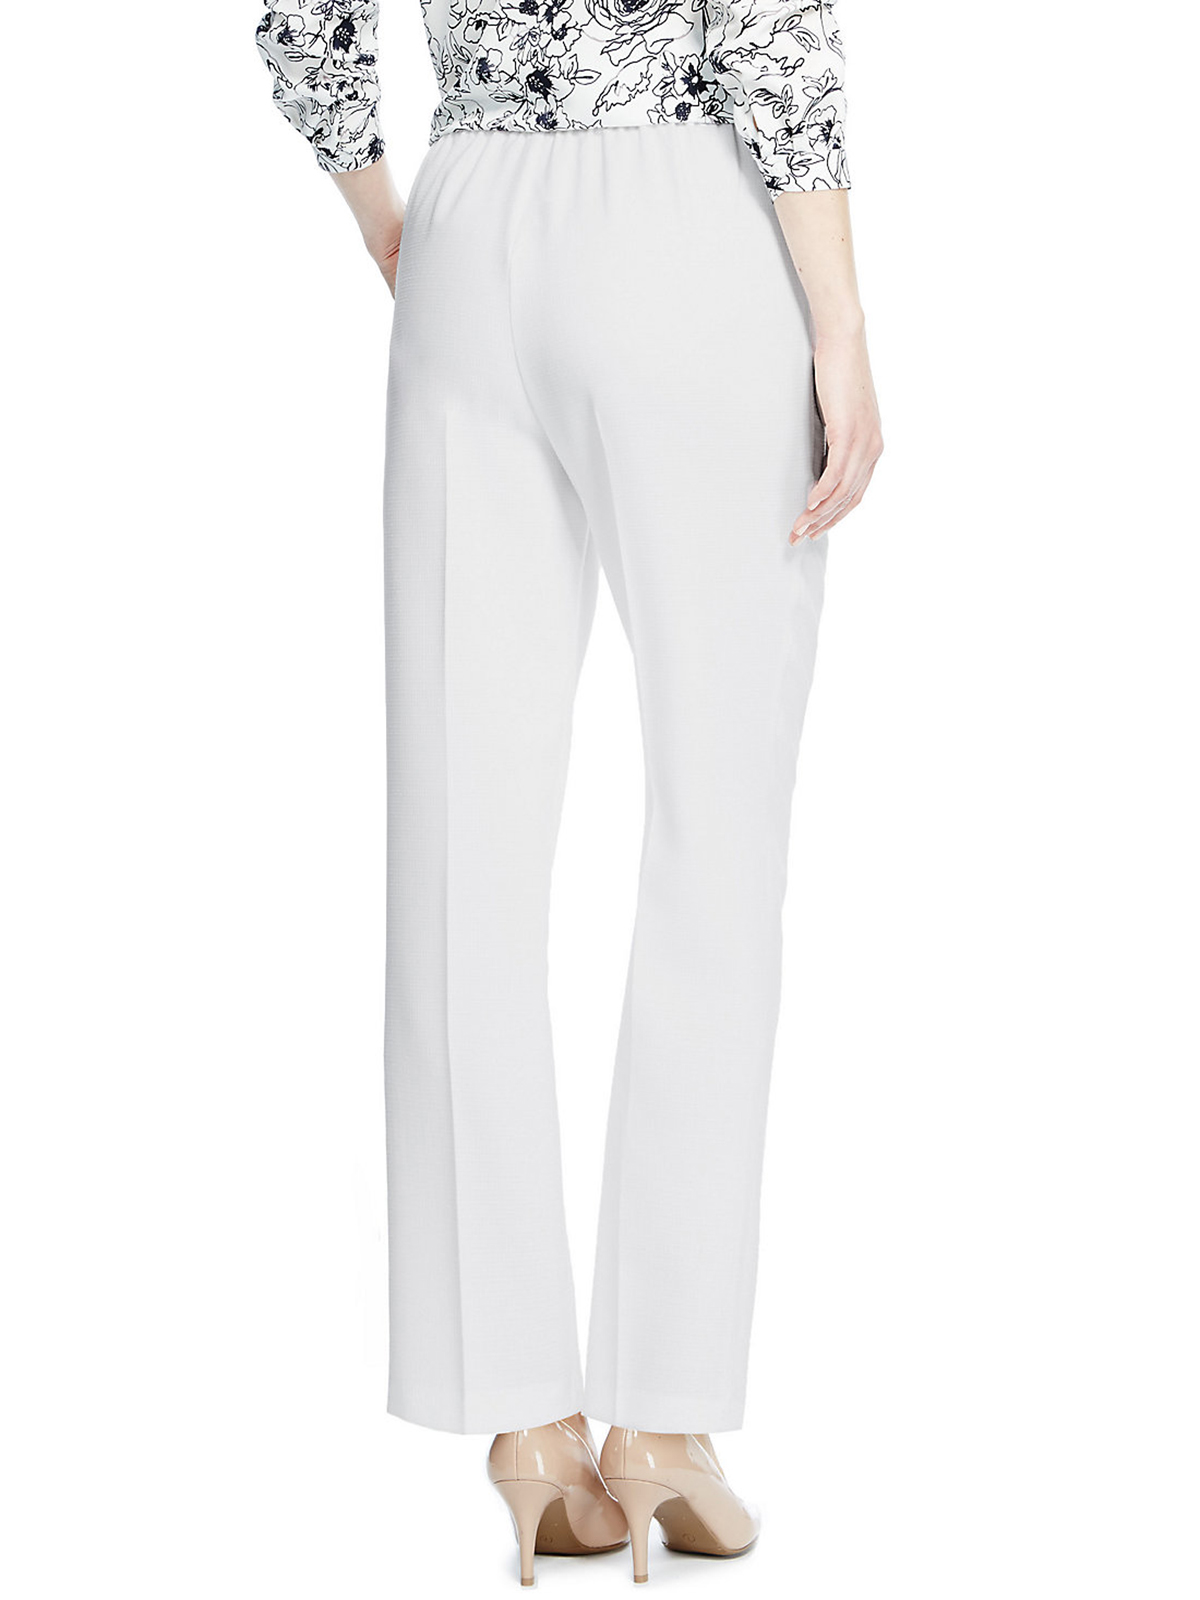 Marks and Spencer - - M&5 WHITE Straight Leg Pull On Trousers - Size 8 ...